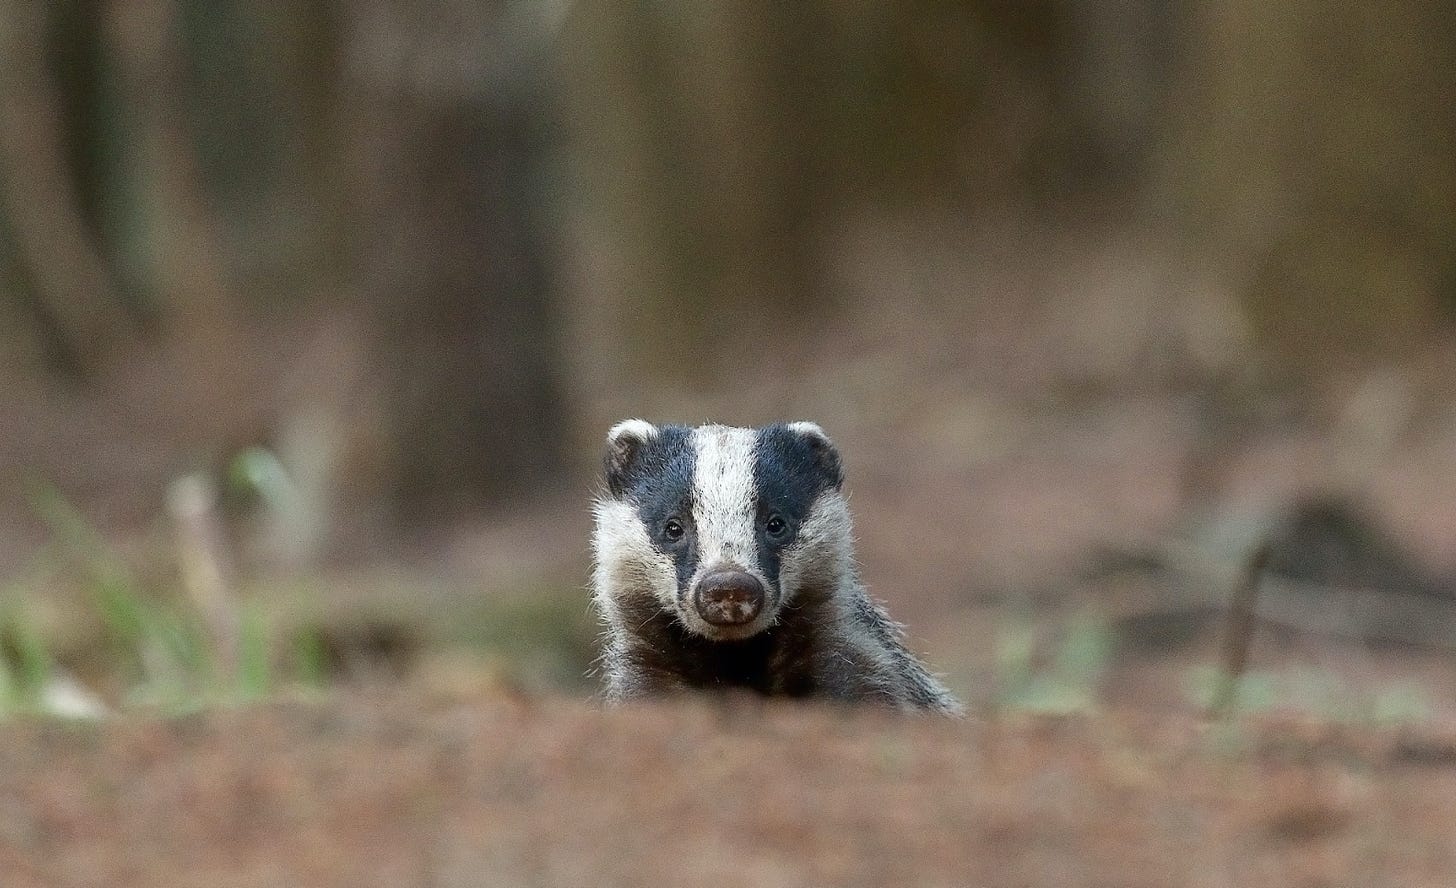 A badger with a white face with black stripes over the eyes and head peeking over a log